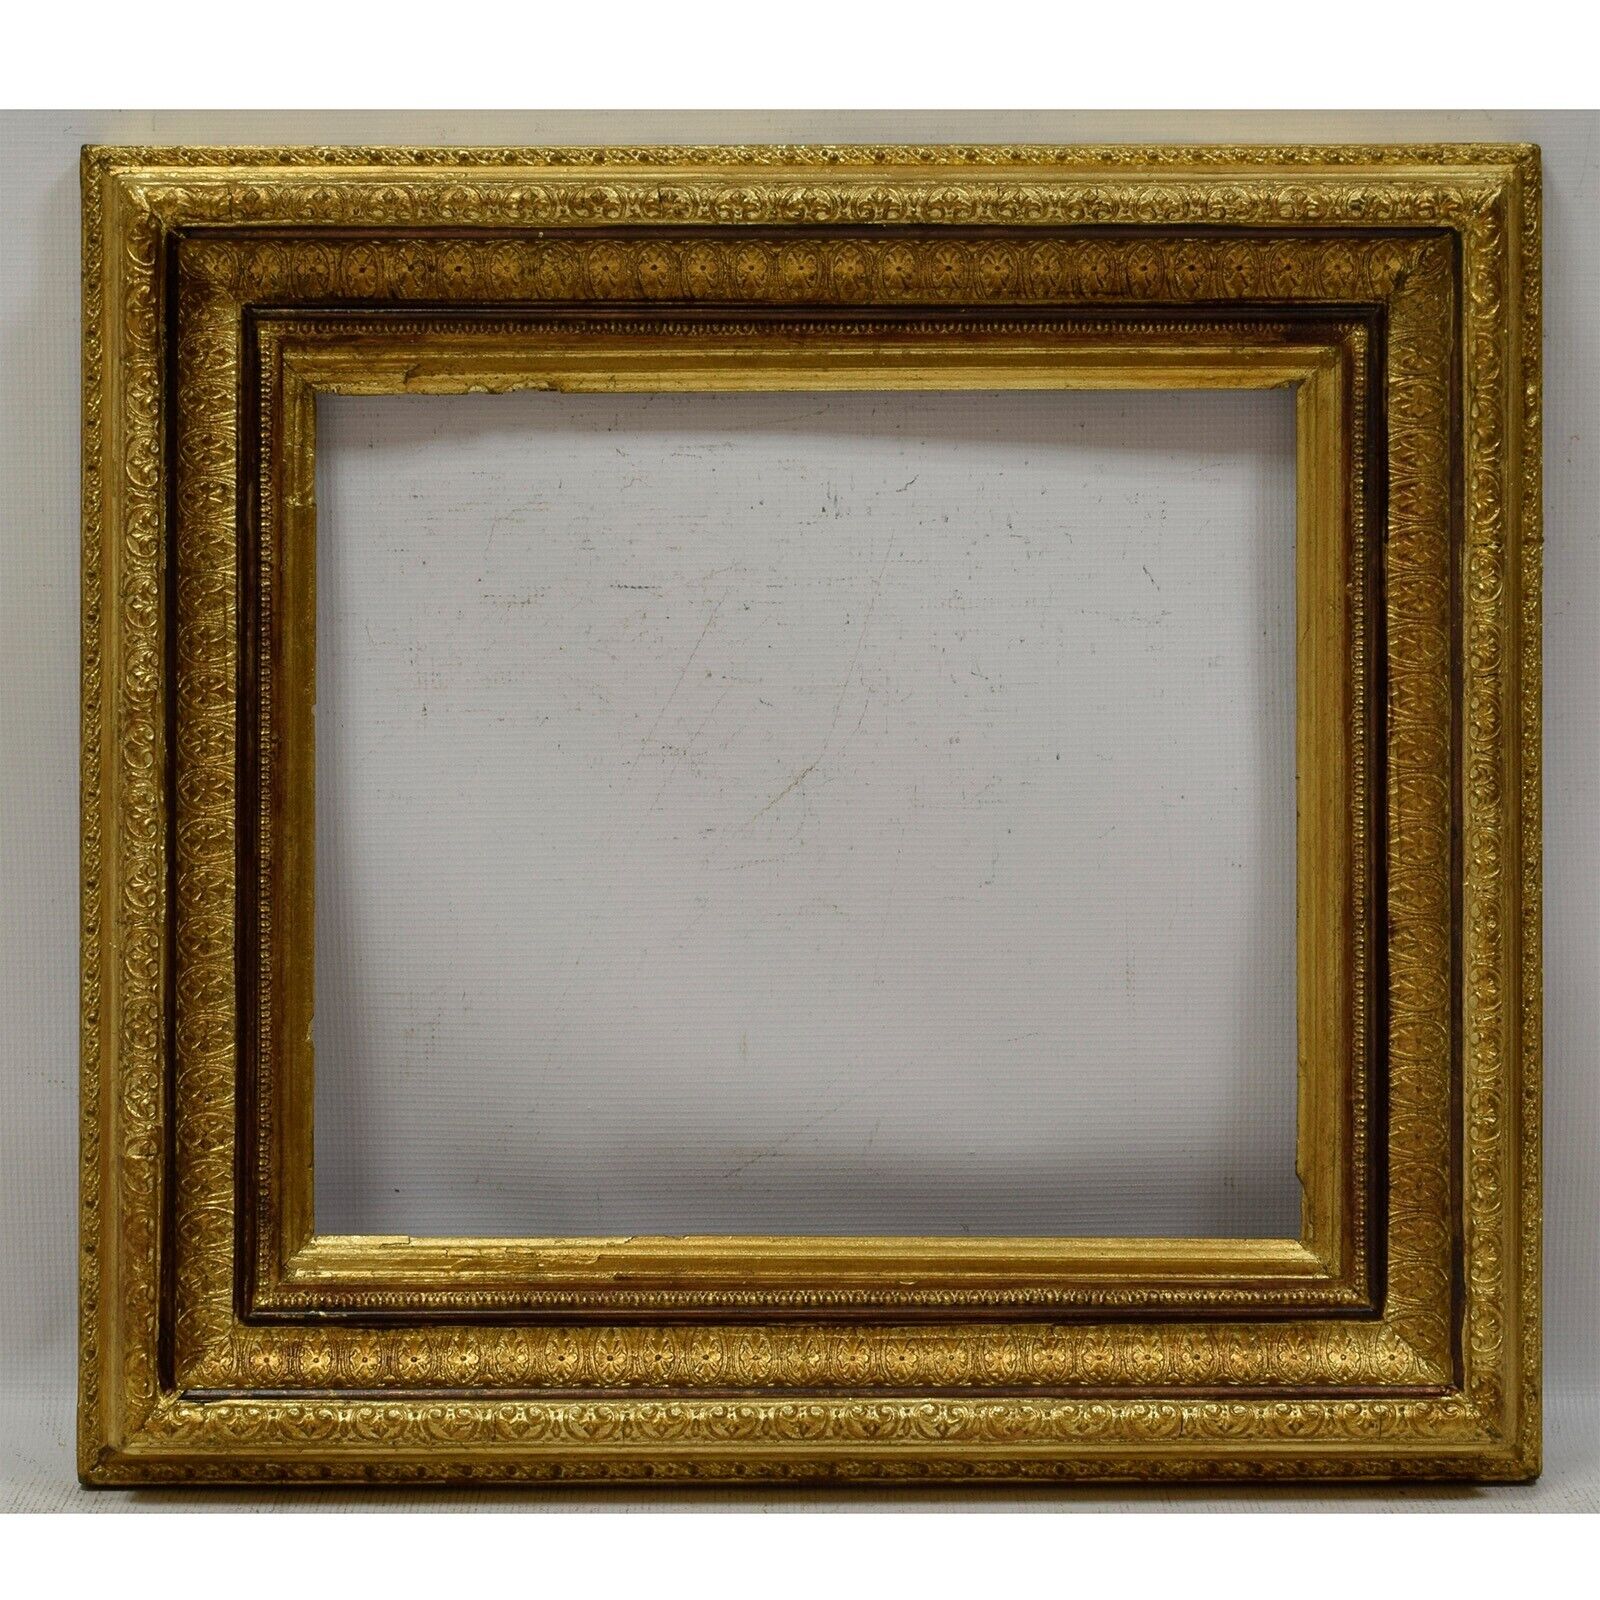 Ca. 1870-1900 Old wooden frame decorative with metal leaf Internal: 15.7x13.7 in